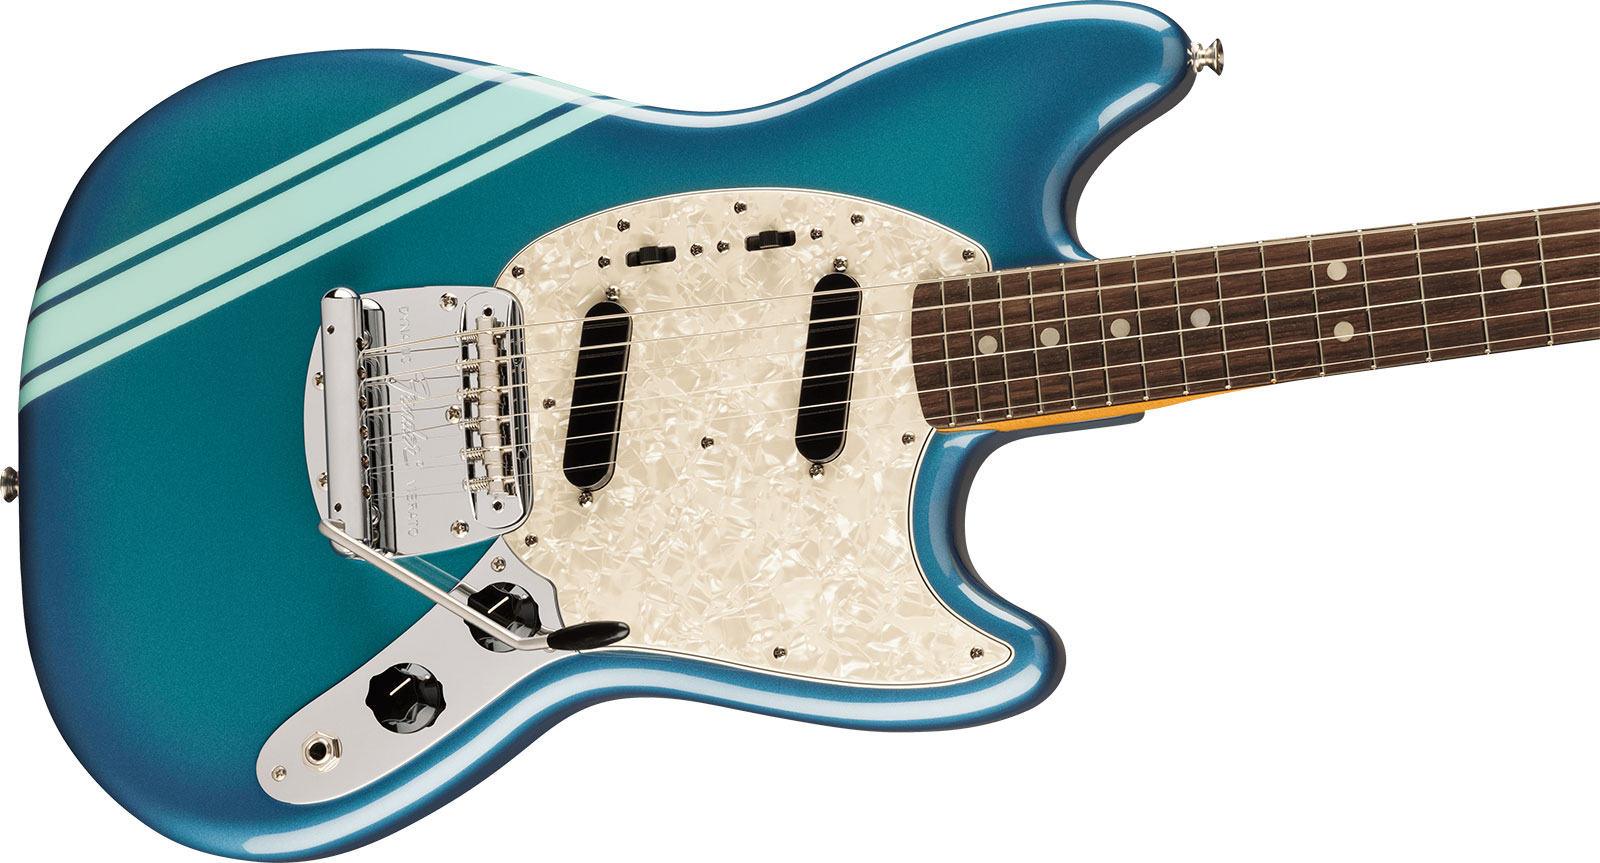 Fender Mustang 70s Competition Vintera 2 Mex 2s Trem Rw - Competition Blue - Retro rock electric guitar - Variation 2